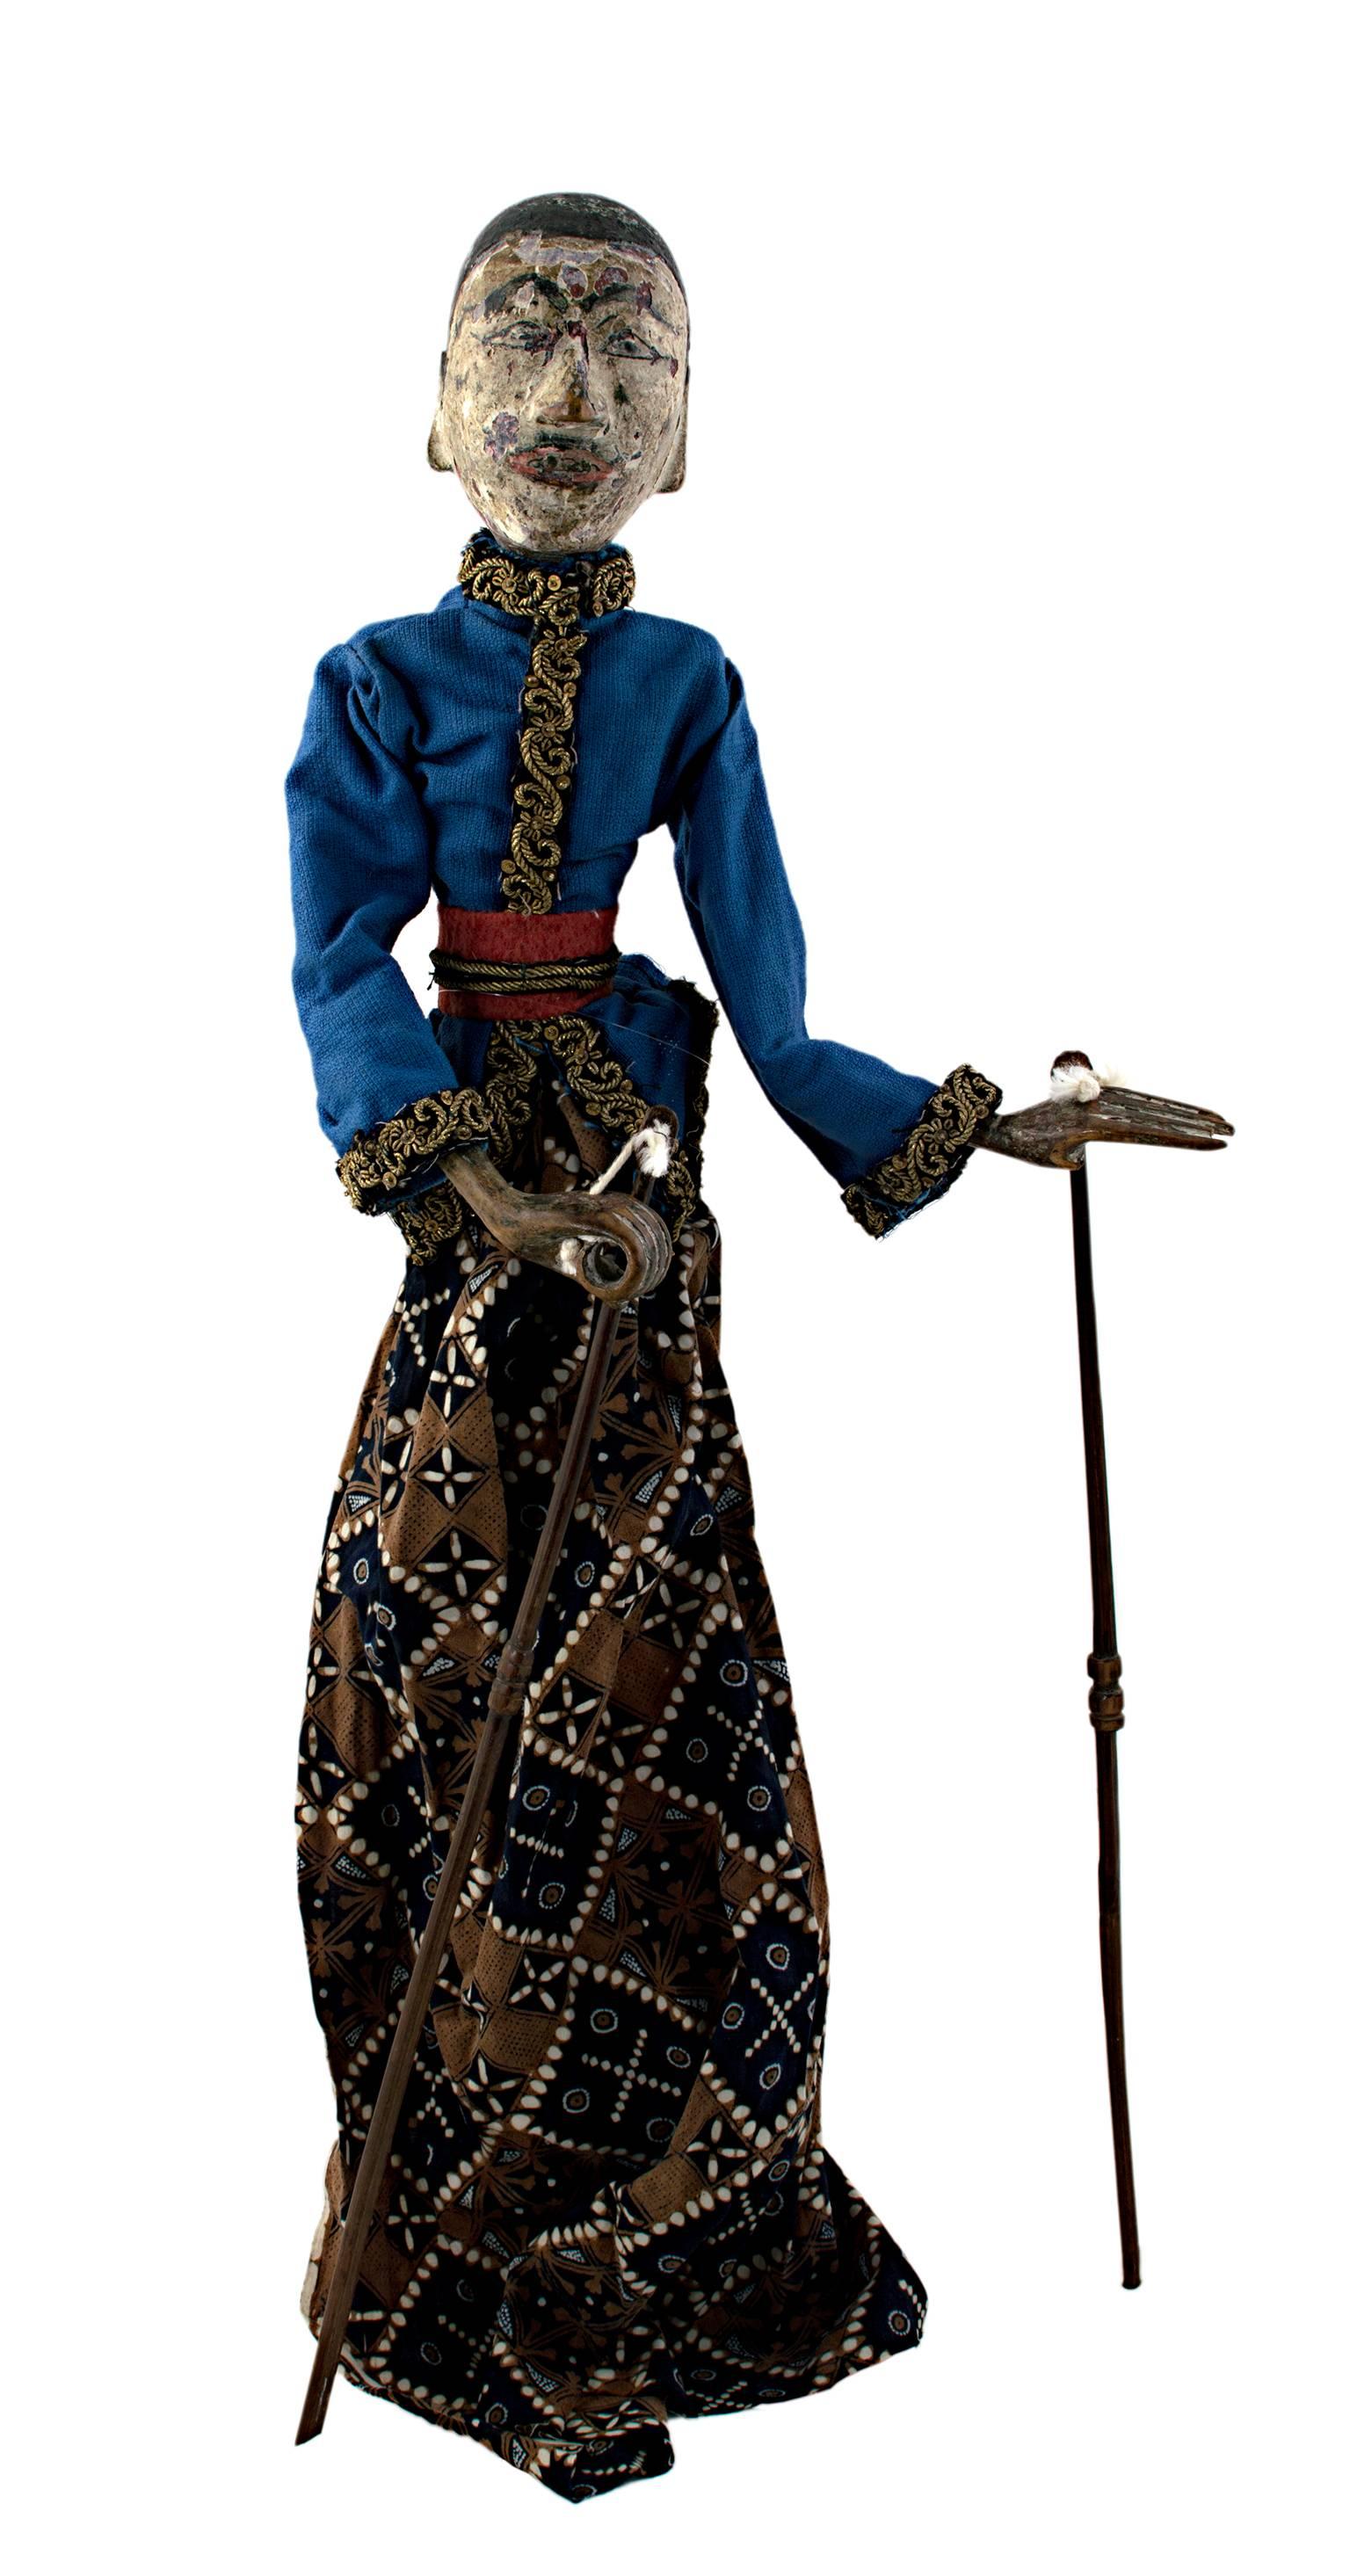 Unknown Figurative Sculpture - "Indonesian Golek Puppet (Male), " Handmade Carved, Painted Wood & Fabric c. 1900